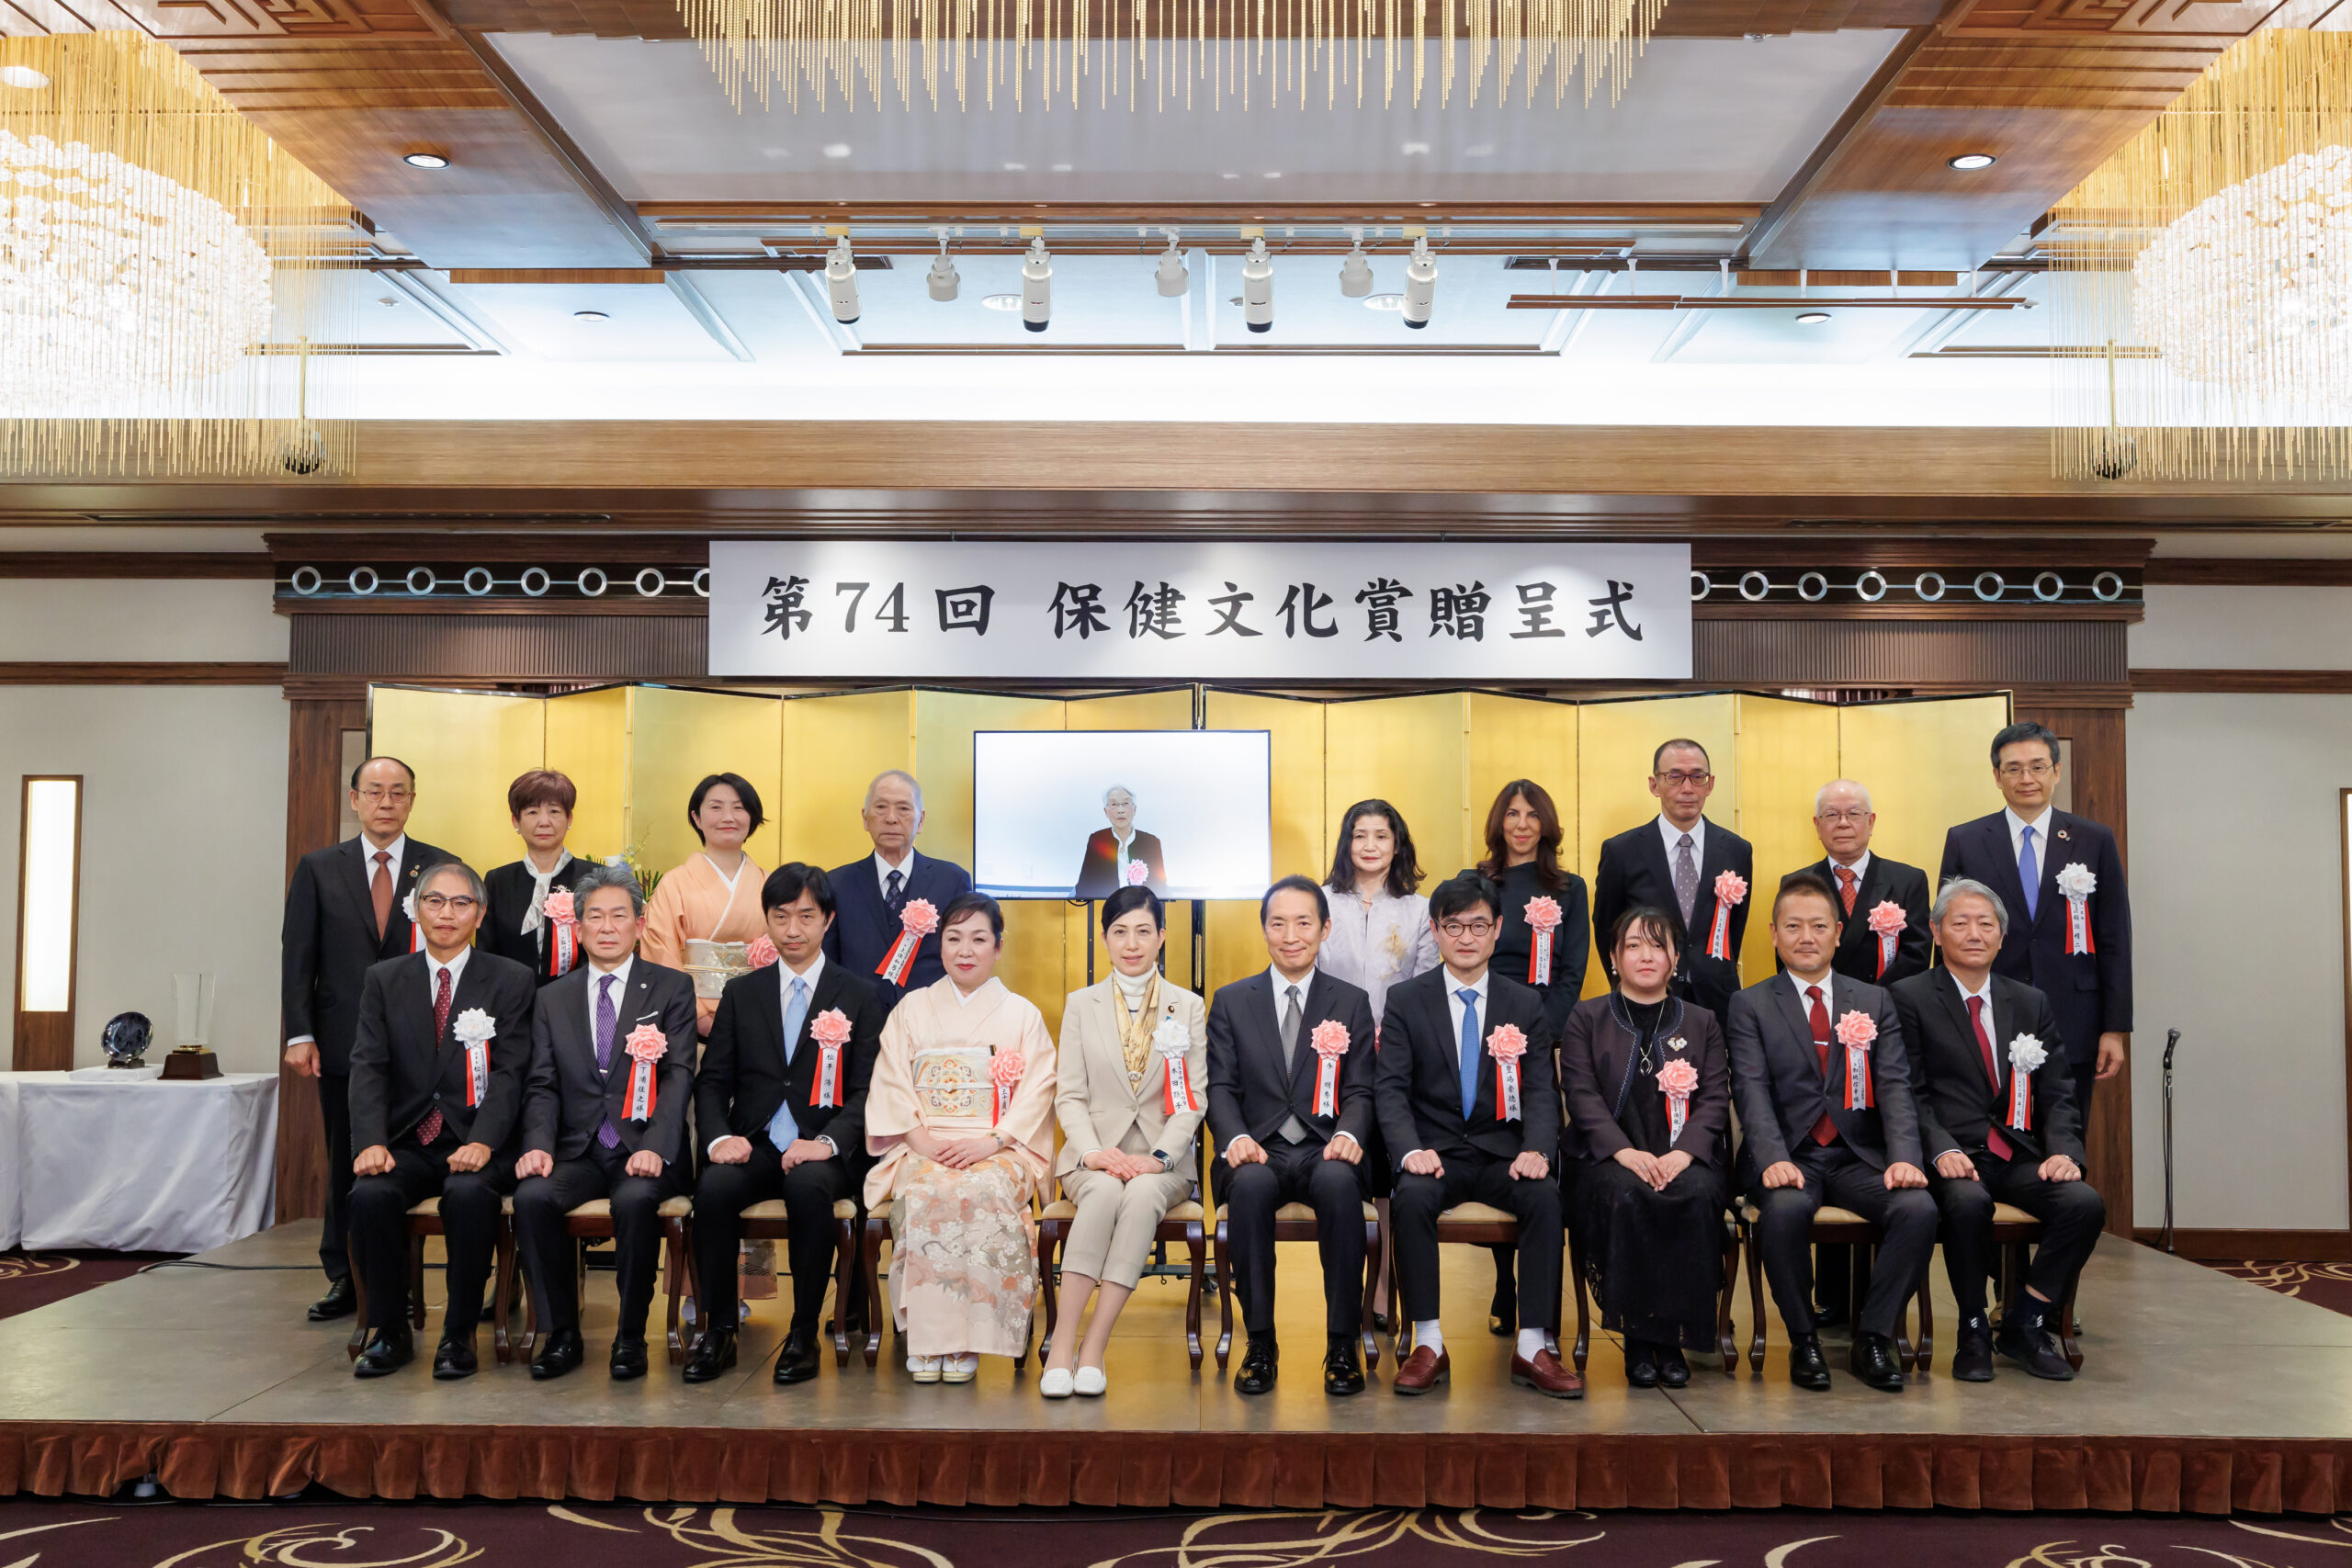 Recipients of the 74th Health Culture Award. Professor Teshima is in the seated row, fourth from the right.